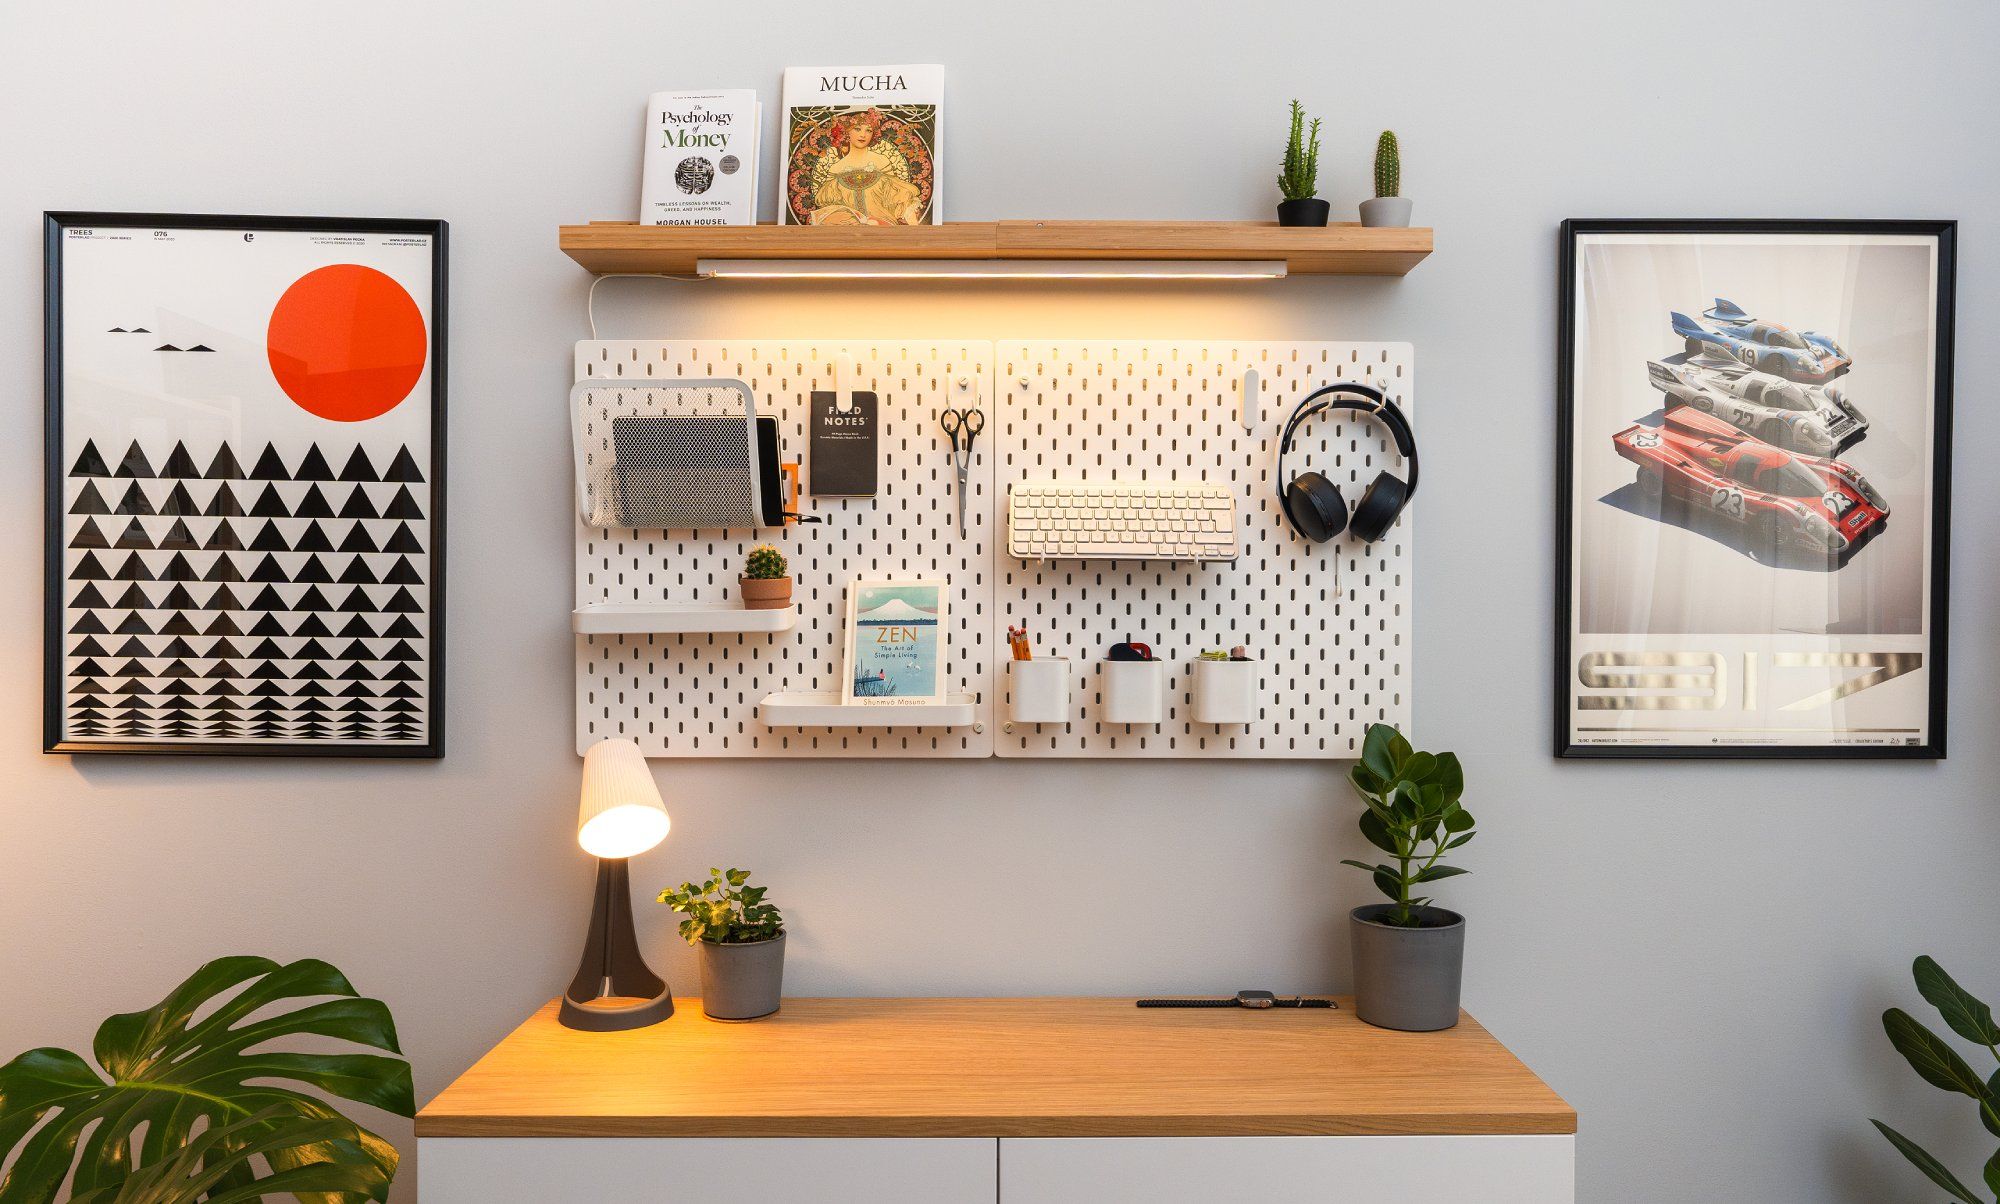 A corner of a minimalist home office features two pegboards for holding stationery and accessories, complemented by houseplants and wall art